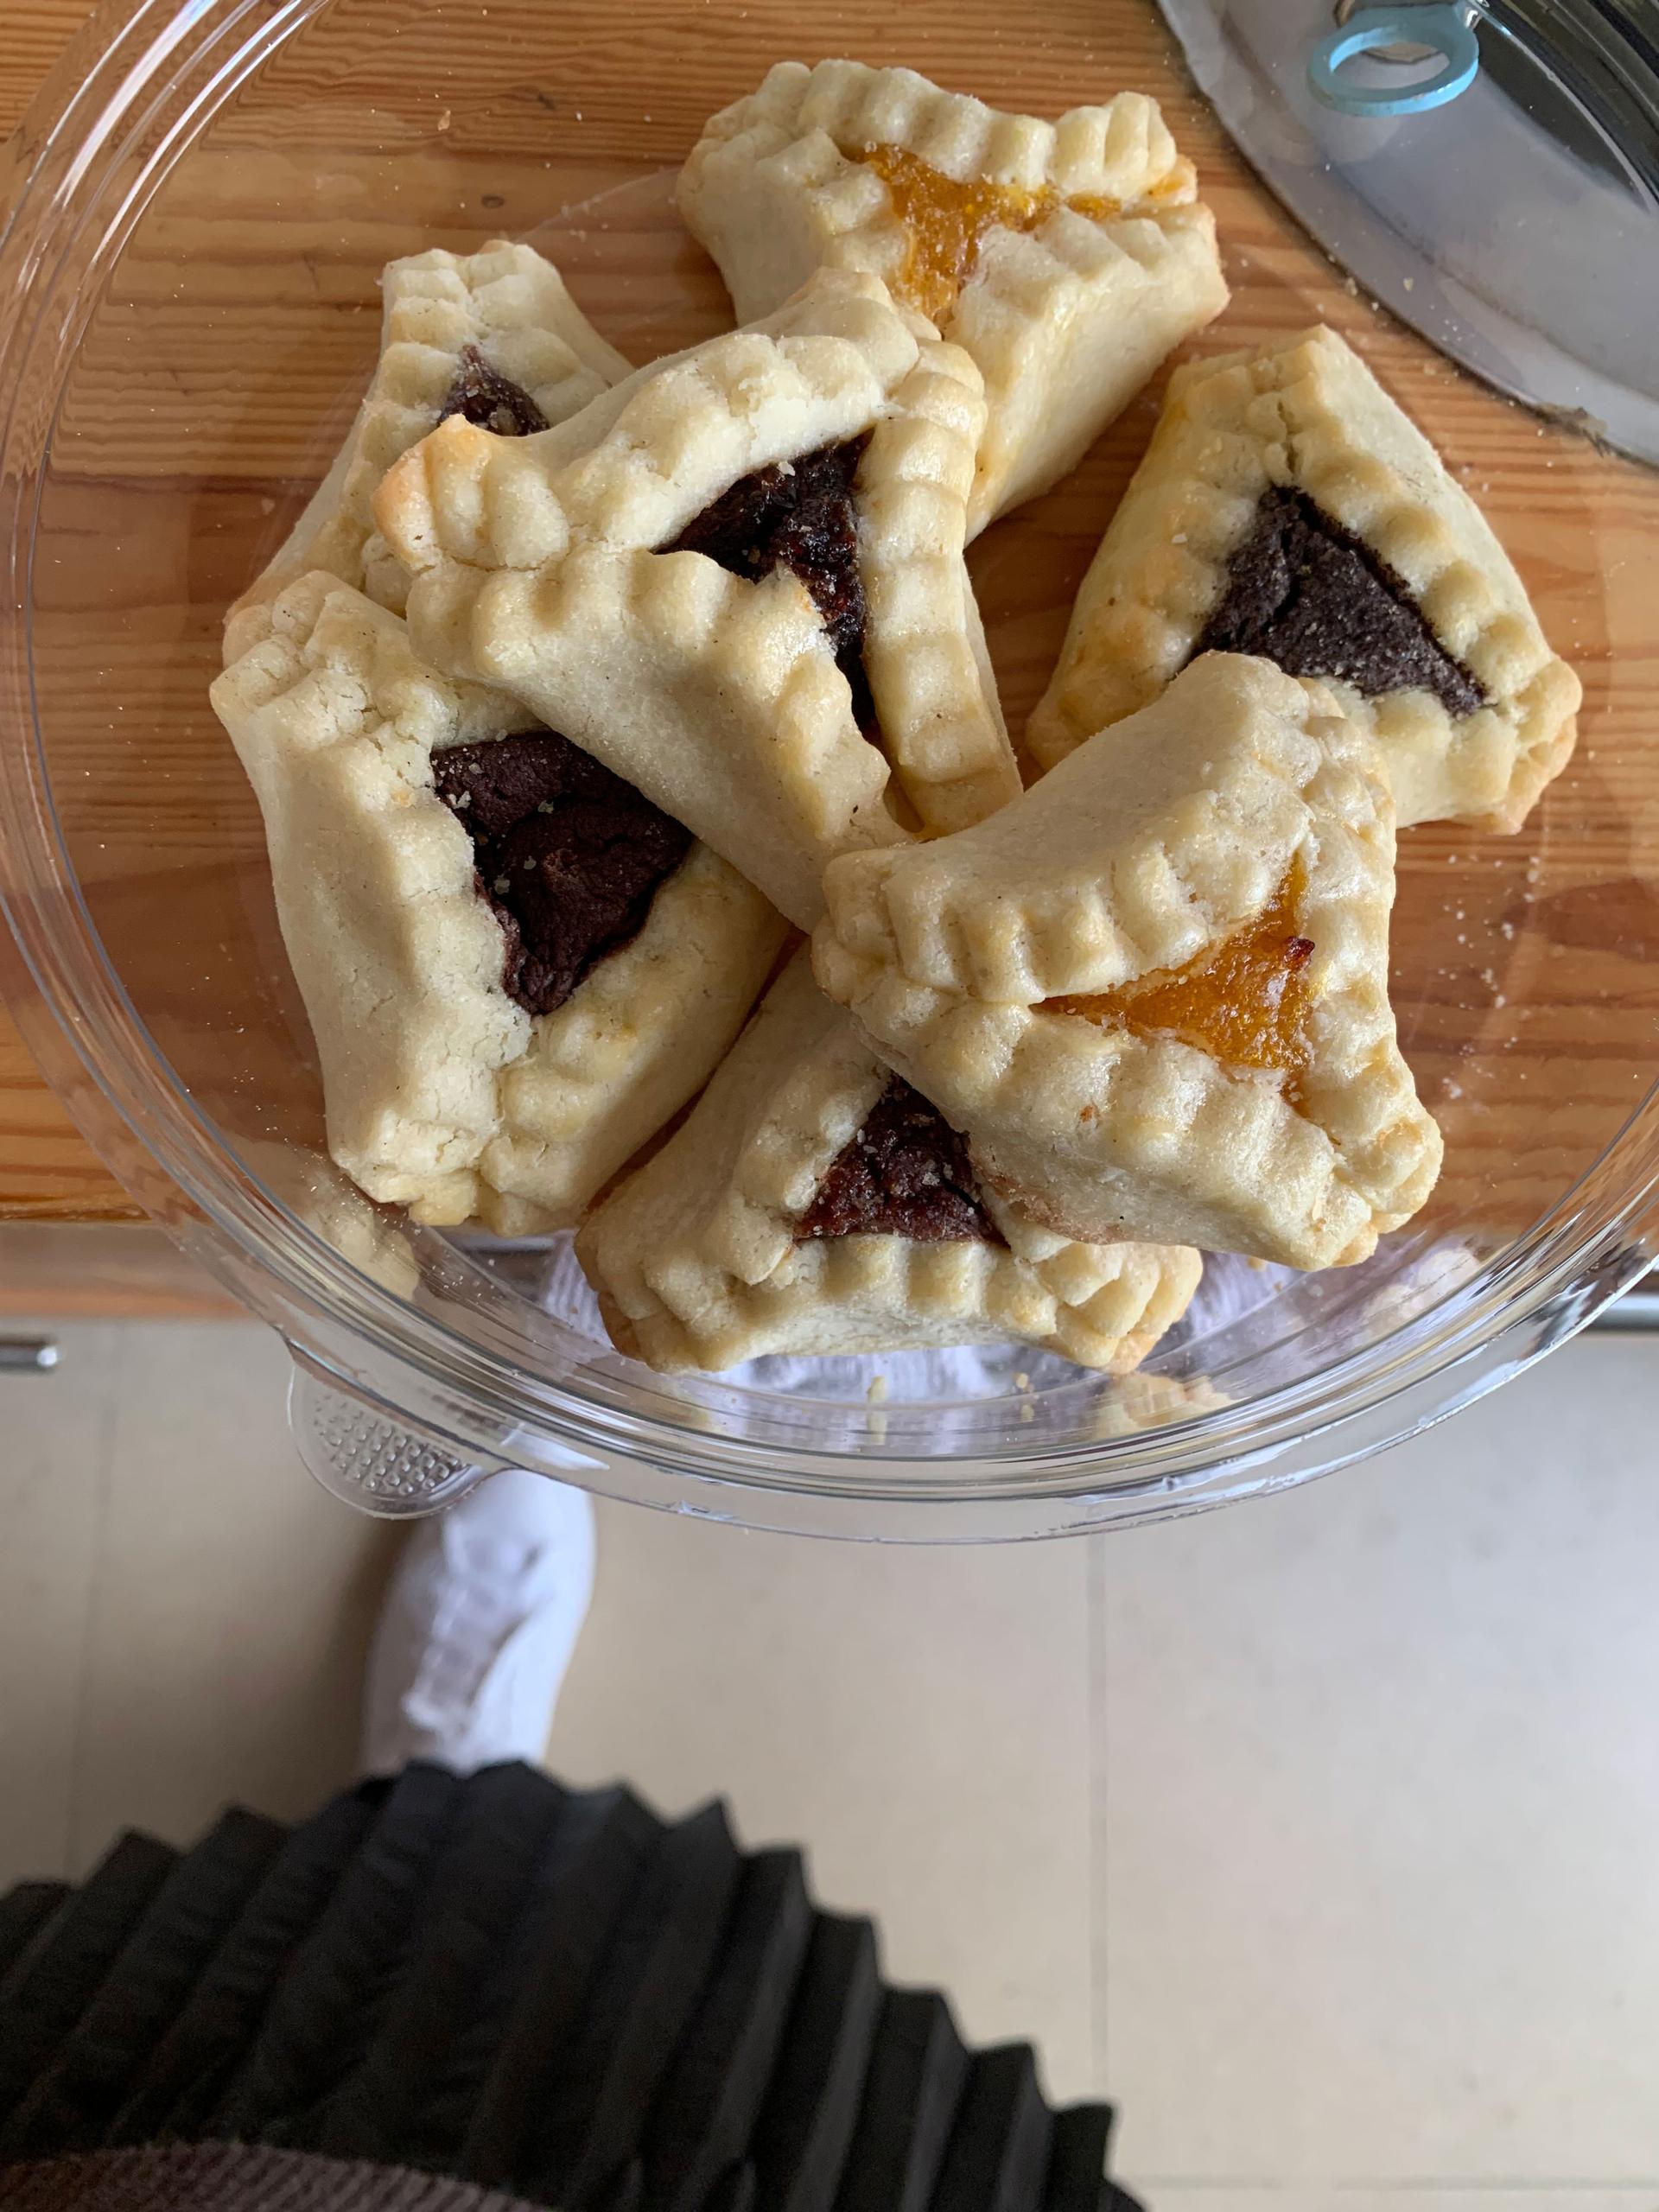 Hamantaschen are traditional Purim cookies, and are said to look like the shape of the villain's three-cornered hat.